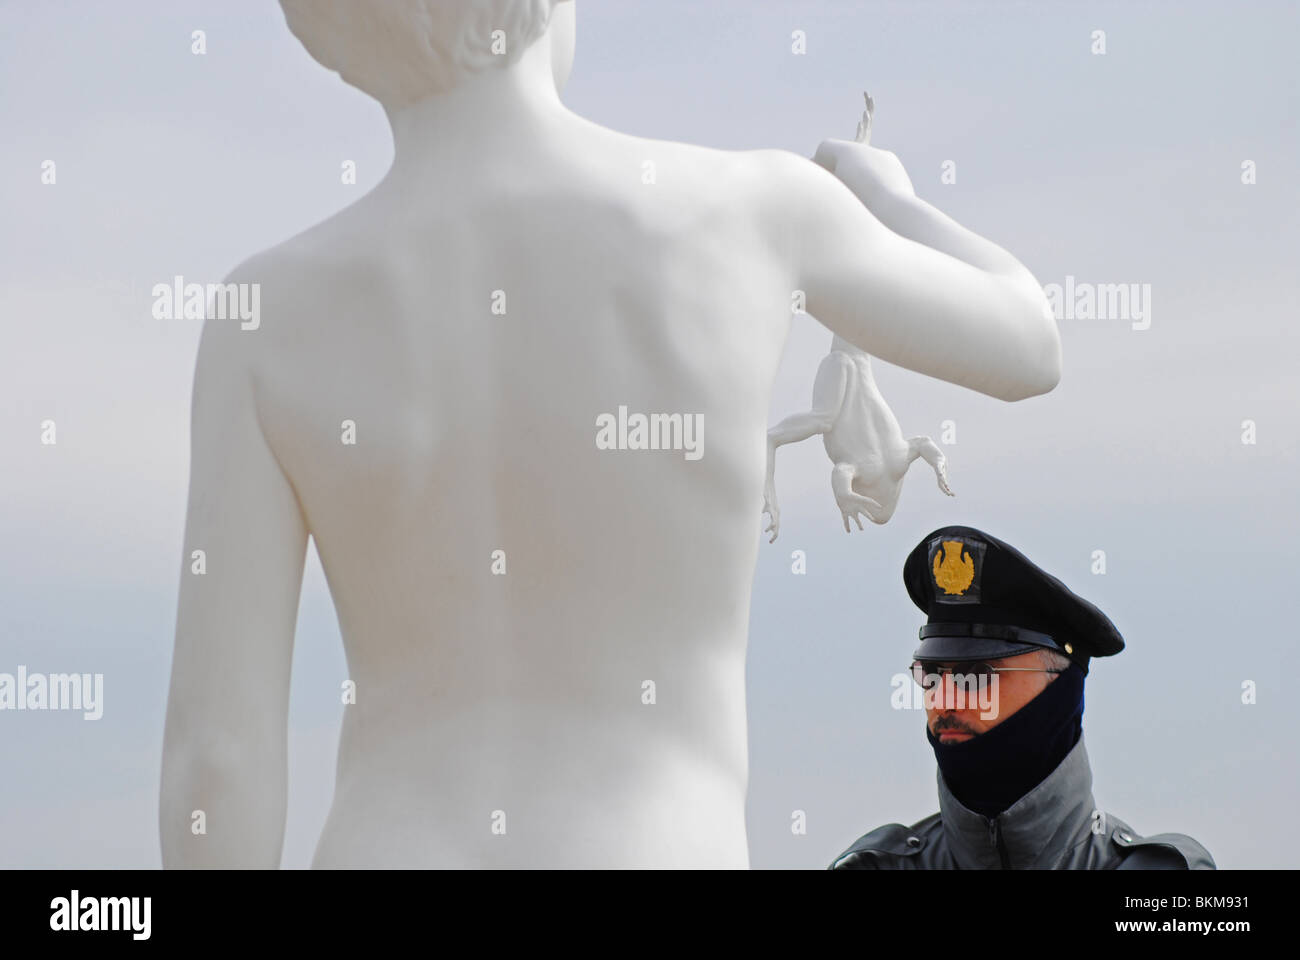 A policeman stands next to Charles Ray's 'Boy With Frog' at the Dogana, Venice, Italy Stock Photo